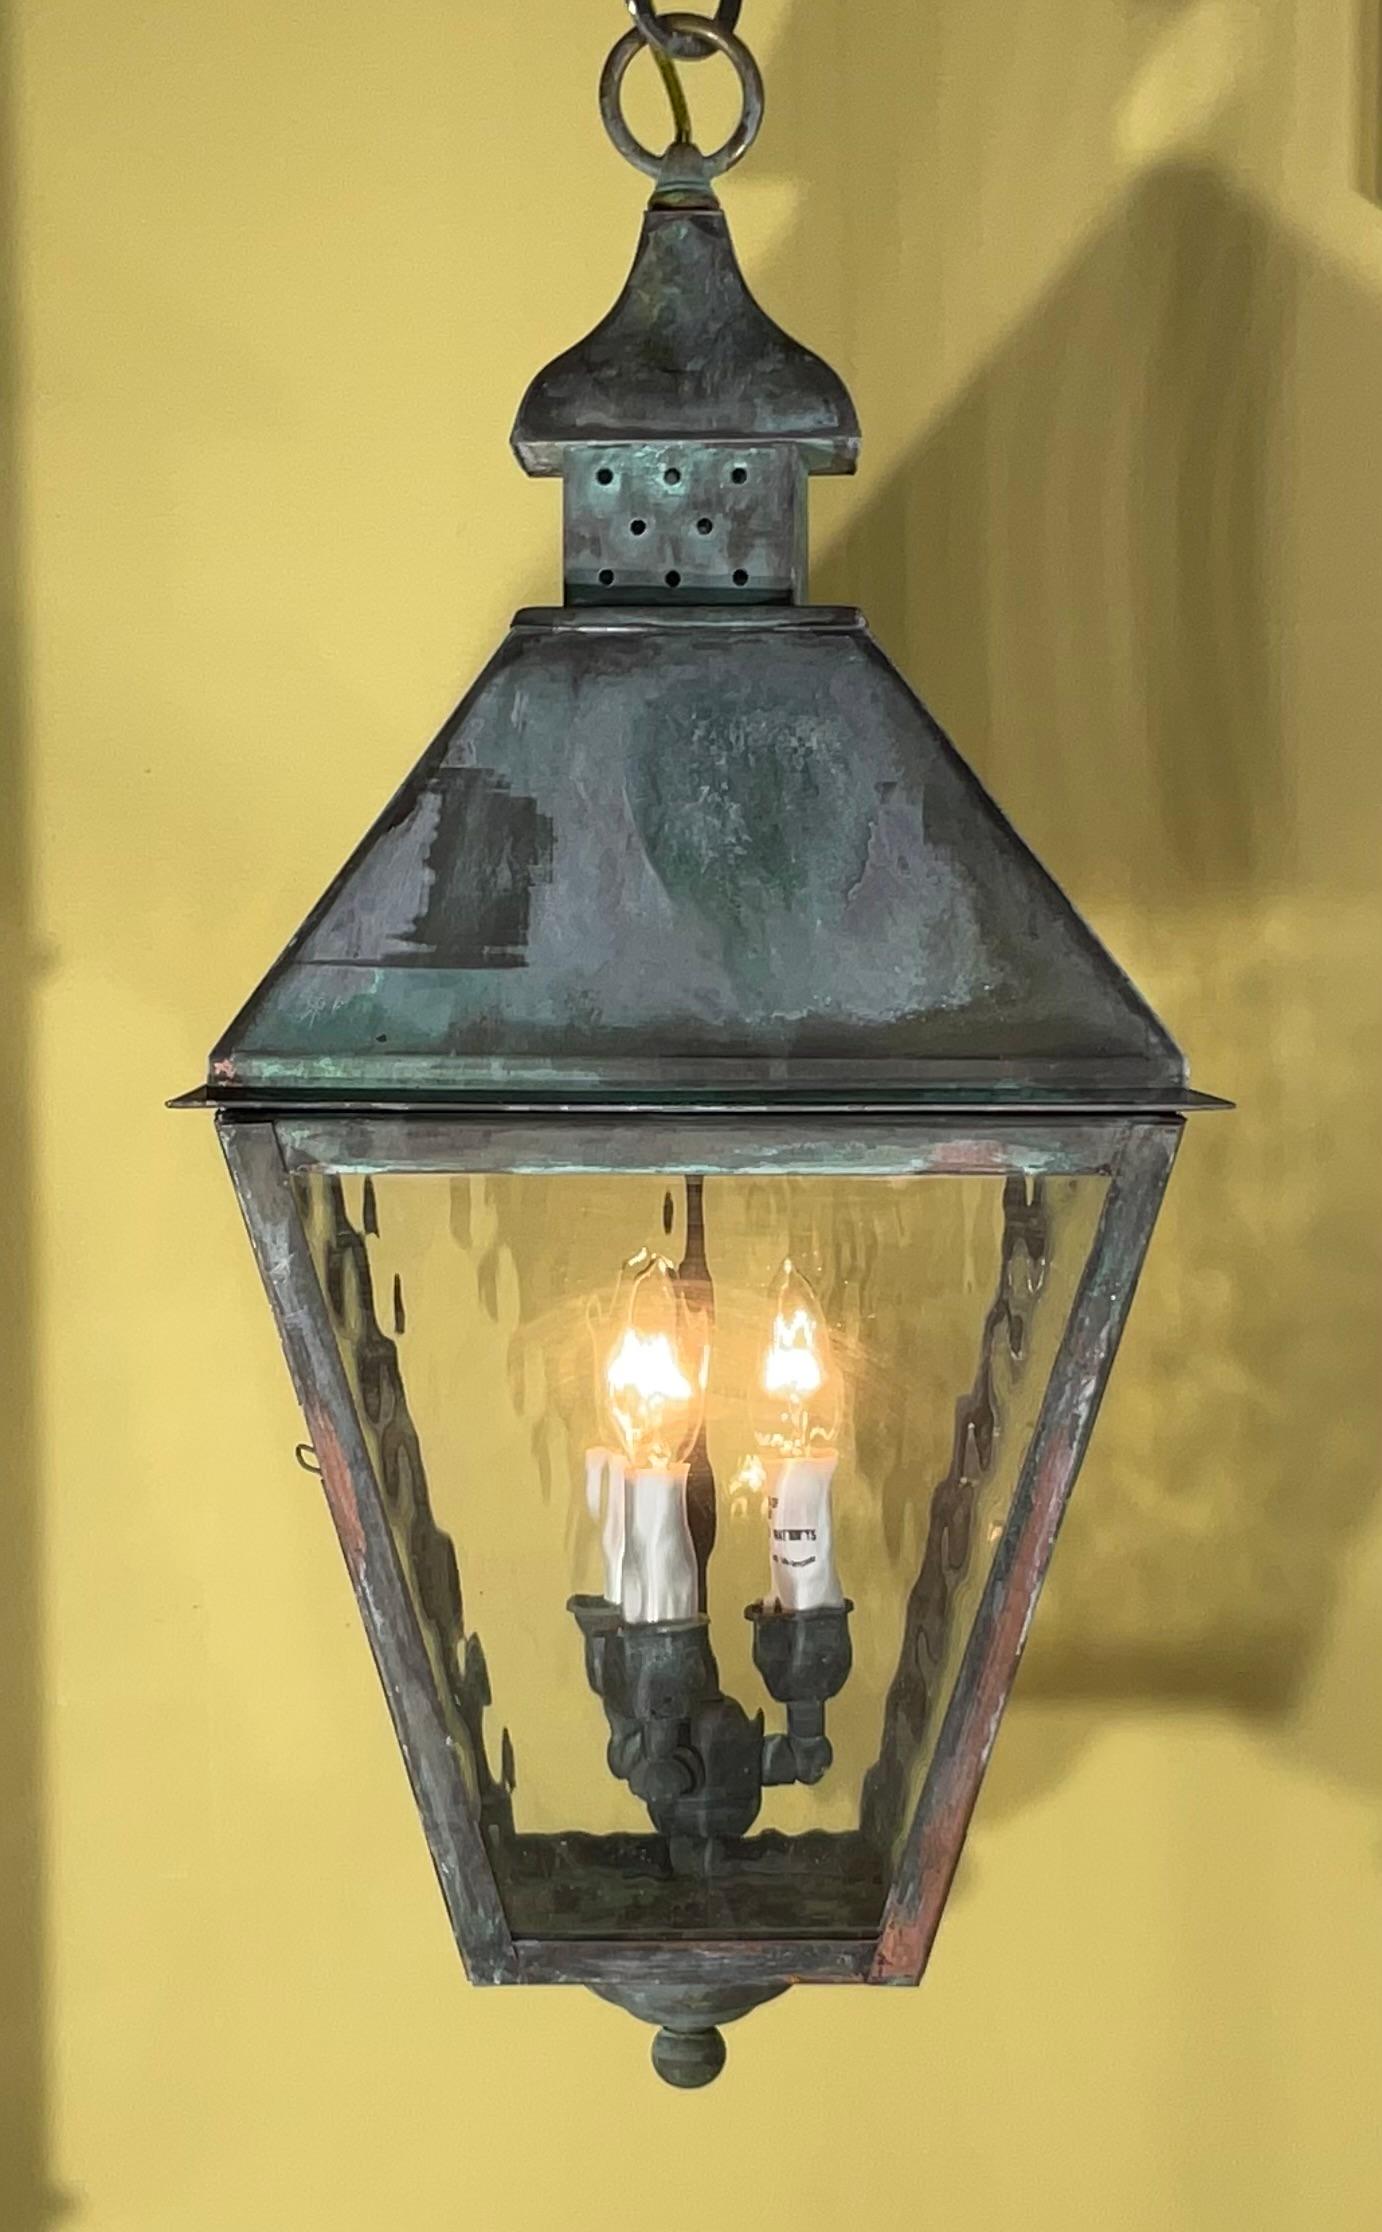 Quality handmade of solid copper and brass  lantern with three 40/watt lights, decorative wave art glass .nice patina . 
Electrified and ready to light. 

Could be used in wet location and indoor.